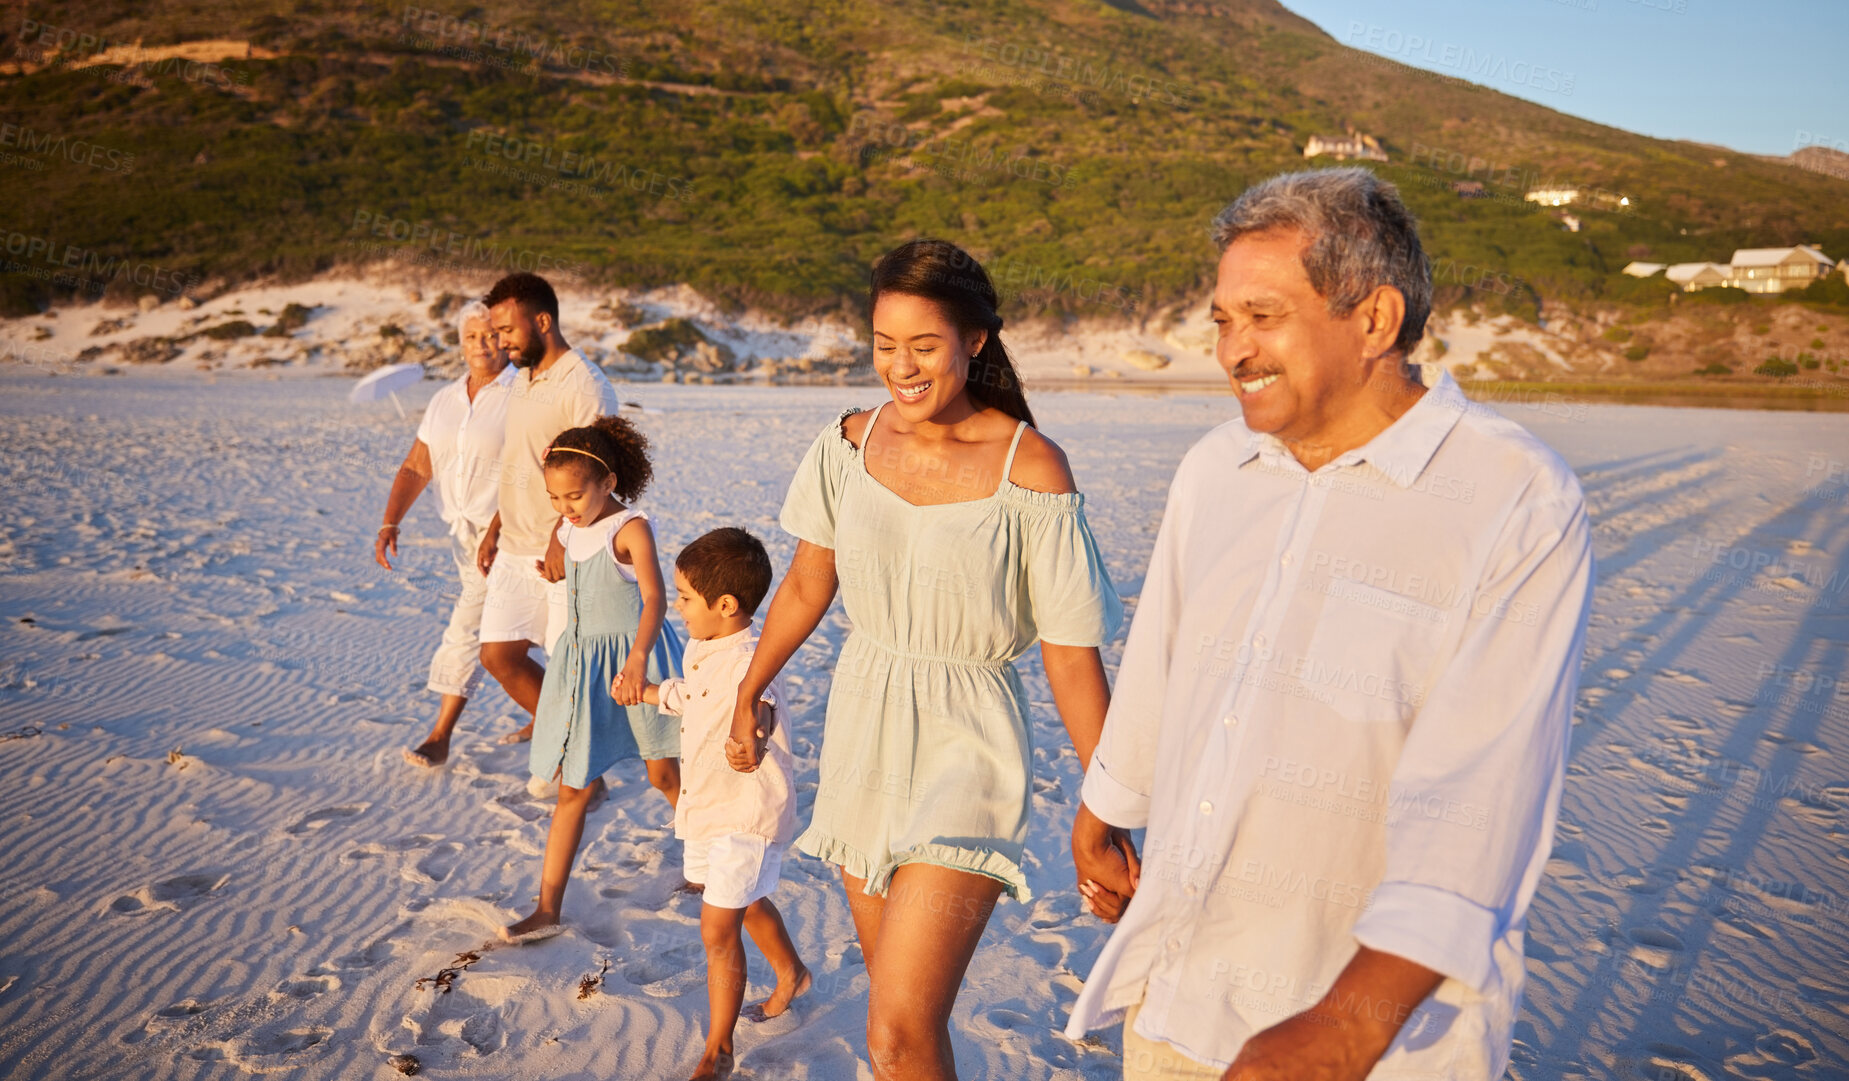 Buy stock photo Big family, holding hands or happy kids at sea walking with grandparents on holiday vacation together. Dad, mom or children siblings bonding or smiling with grandmother or grandfather on beach sand 